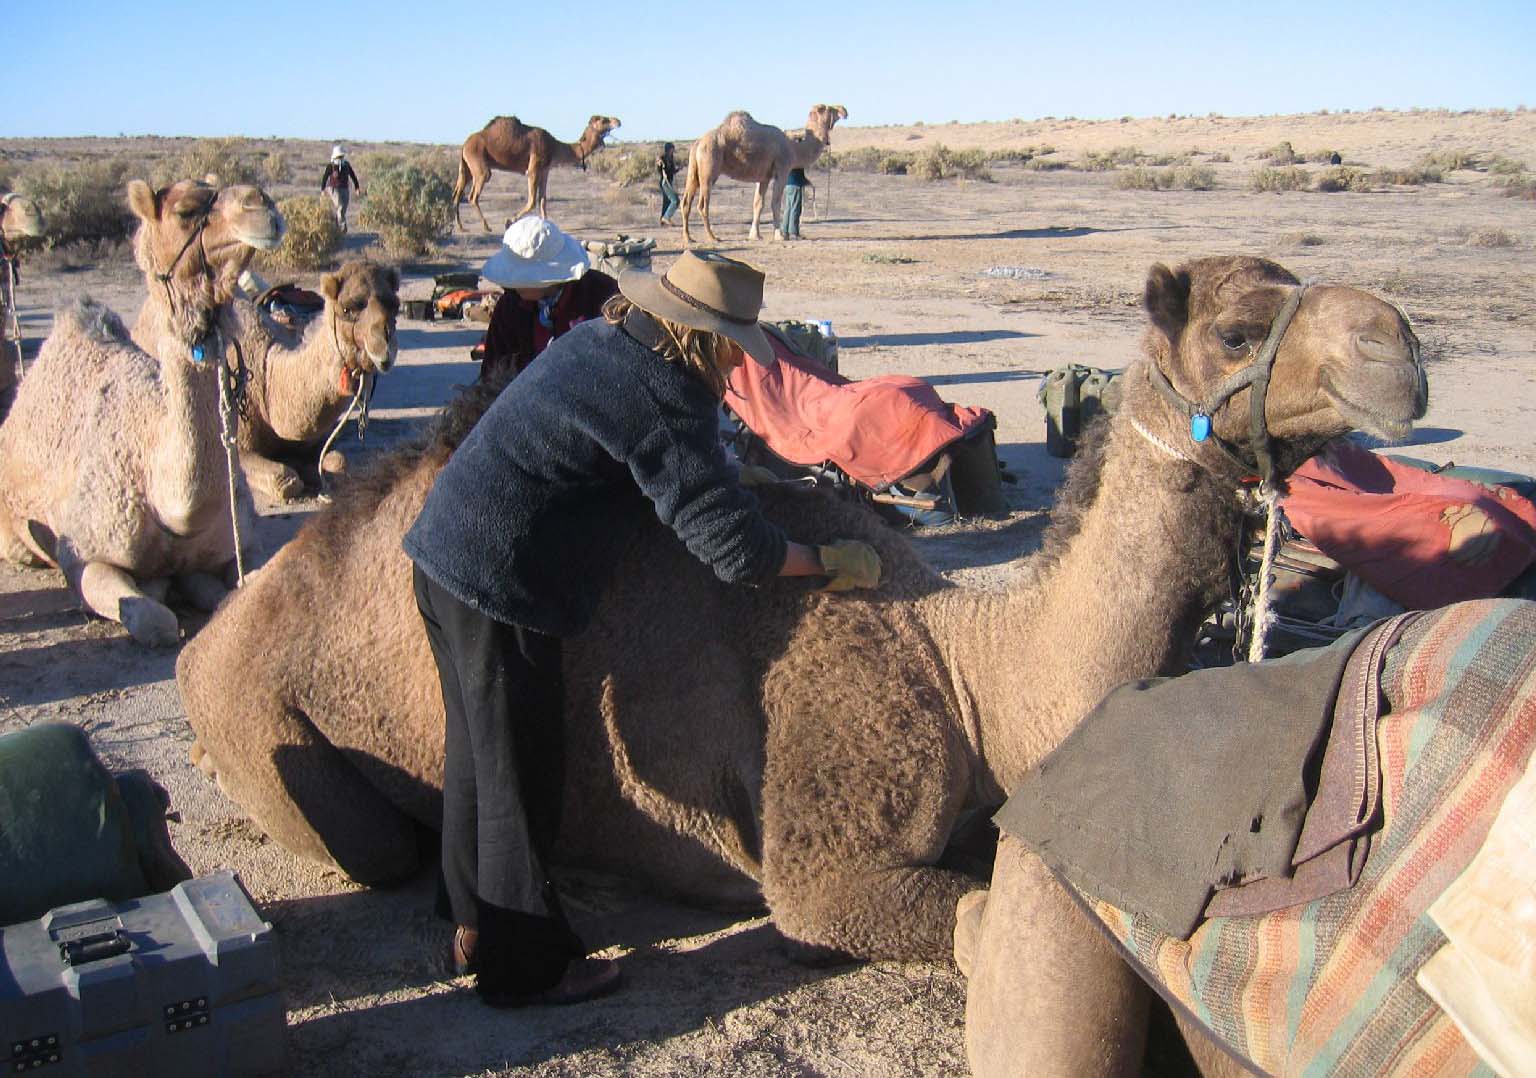 Loading the camels.